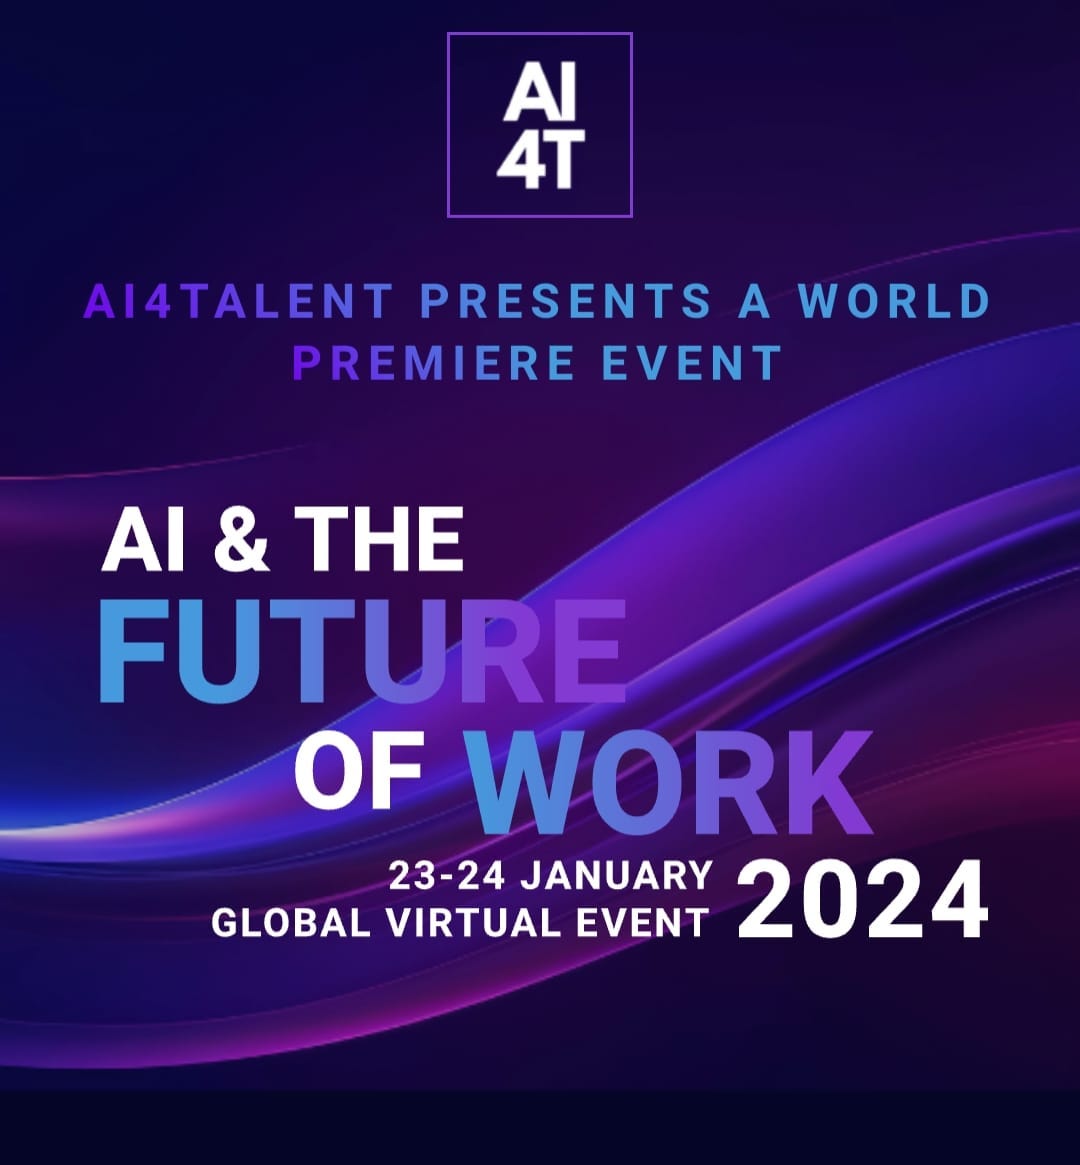 May be a graphic of text that says "AI 4T AI4TALENT PRESENTS A WORLD PREMIERE EVENT AI & THE FUTURE OF WORK 23-24 JANUARY 2024 GLOBAL VIRTUAL EVENT"